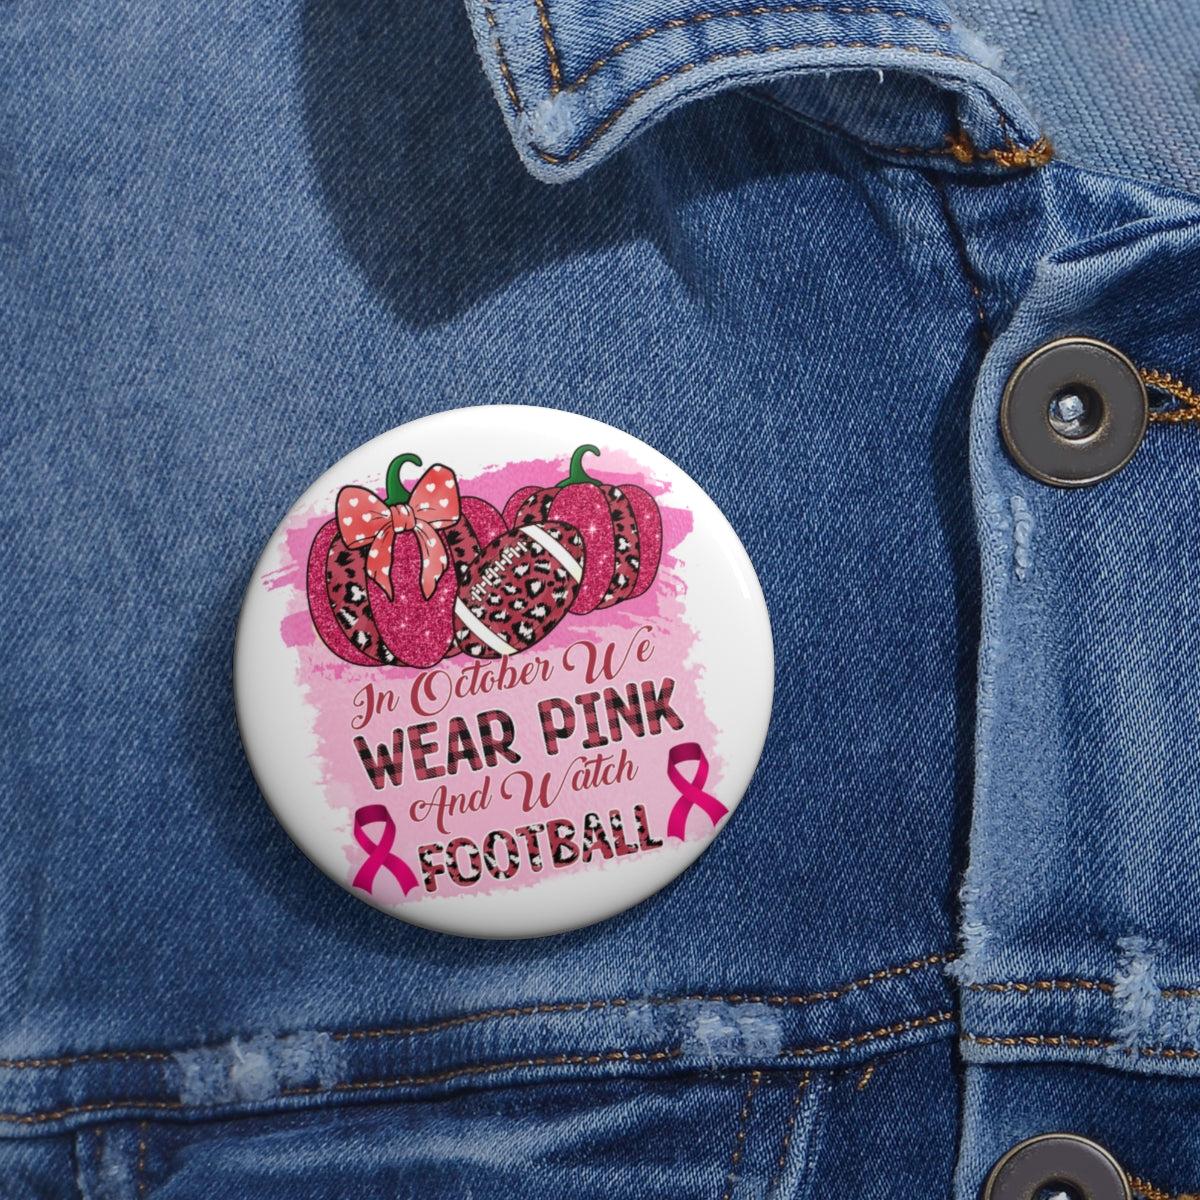 We wear Pink and Watch Football Pin Buttons